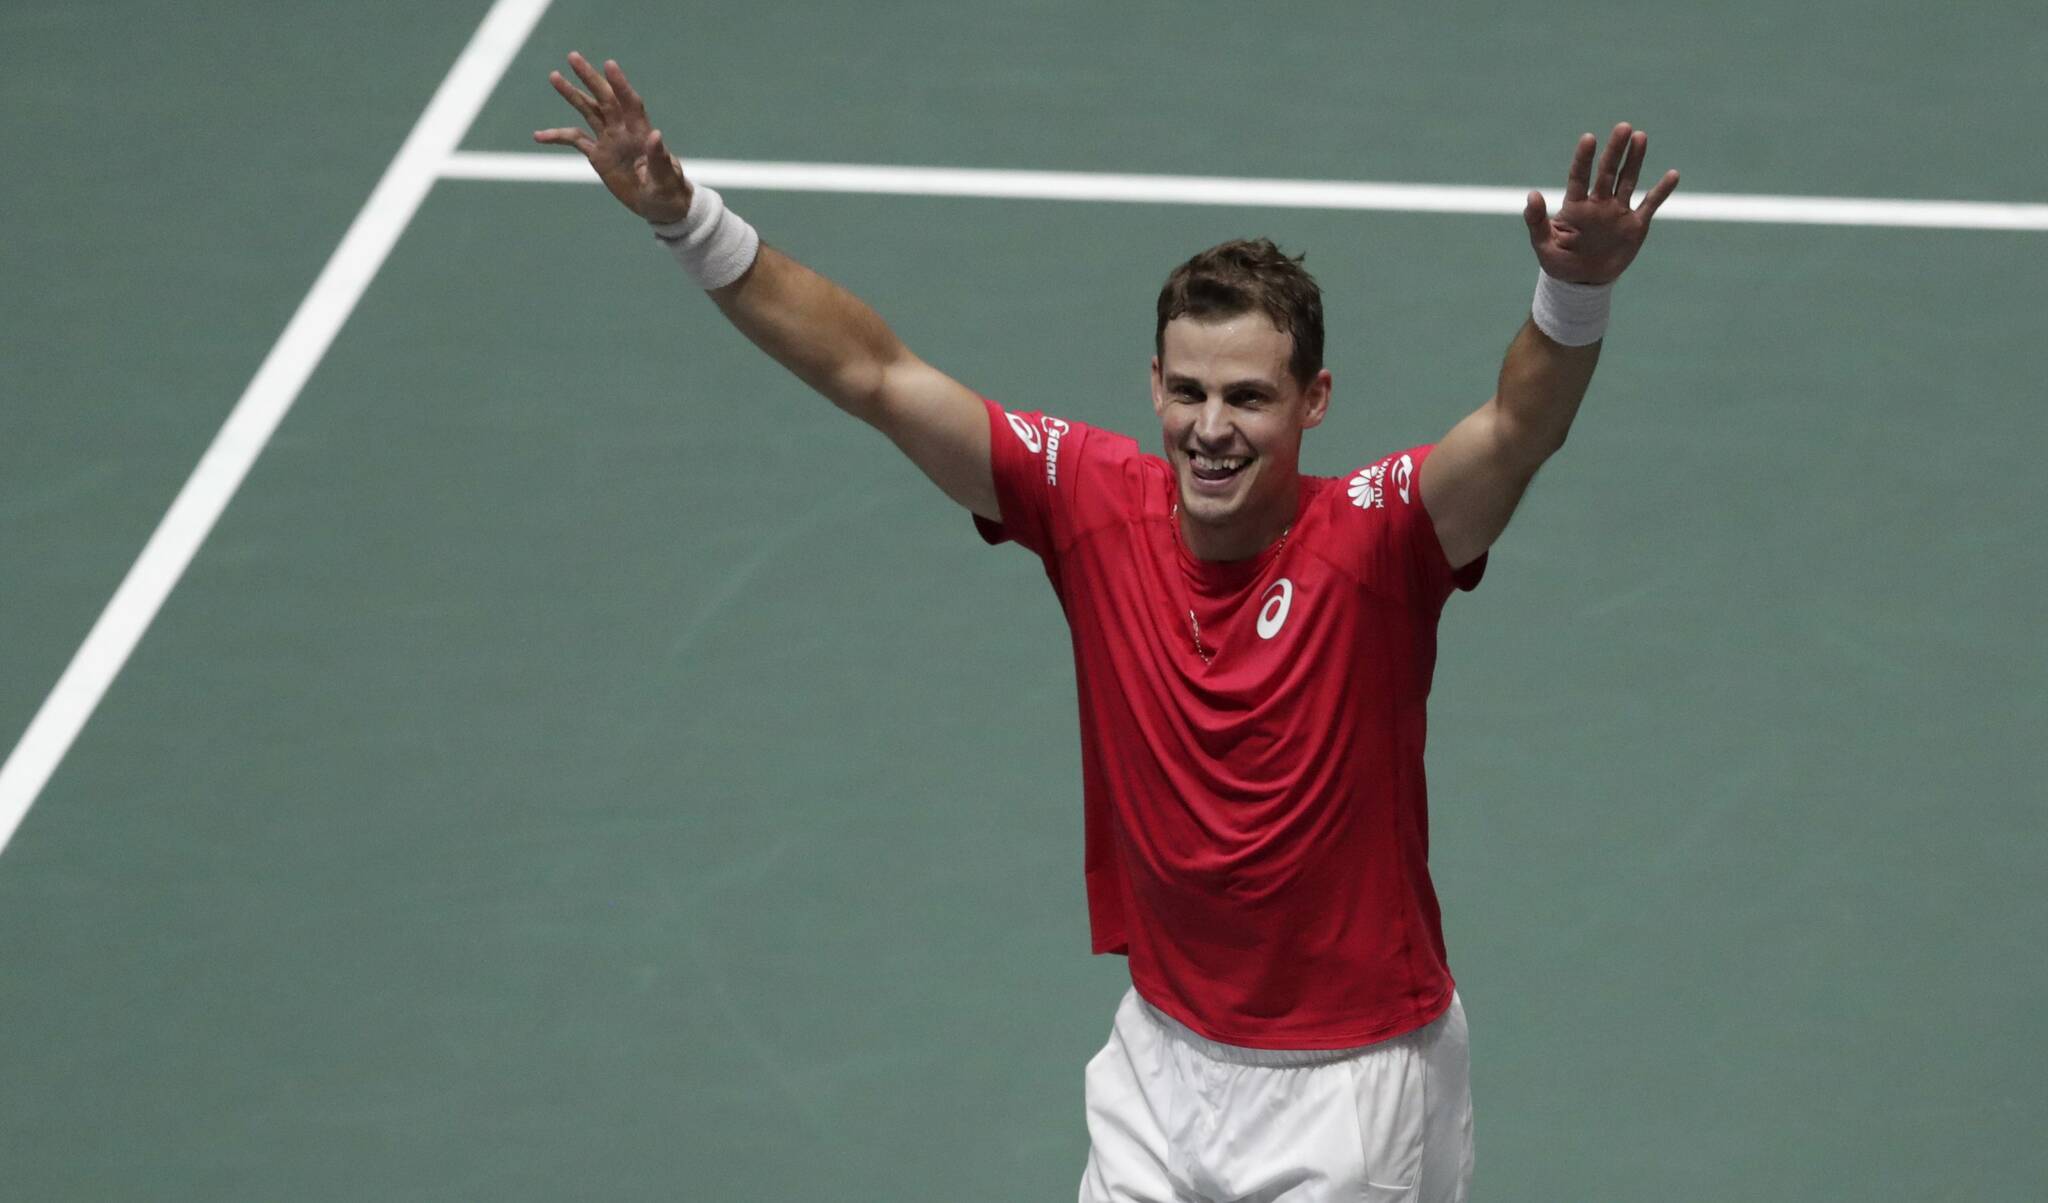 Vernon’s Vasek Pospisil has been named to the Canadian team that will represent the country at the Davis Cup Championships in Spain in November. It’s the 21st time Pospisil has represented Canada in Davis Cup competition. (AP Photo/Bernat Armangue)